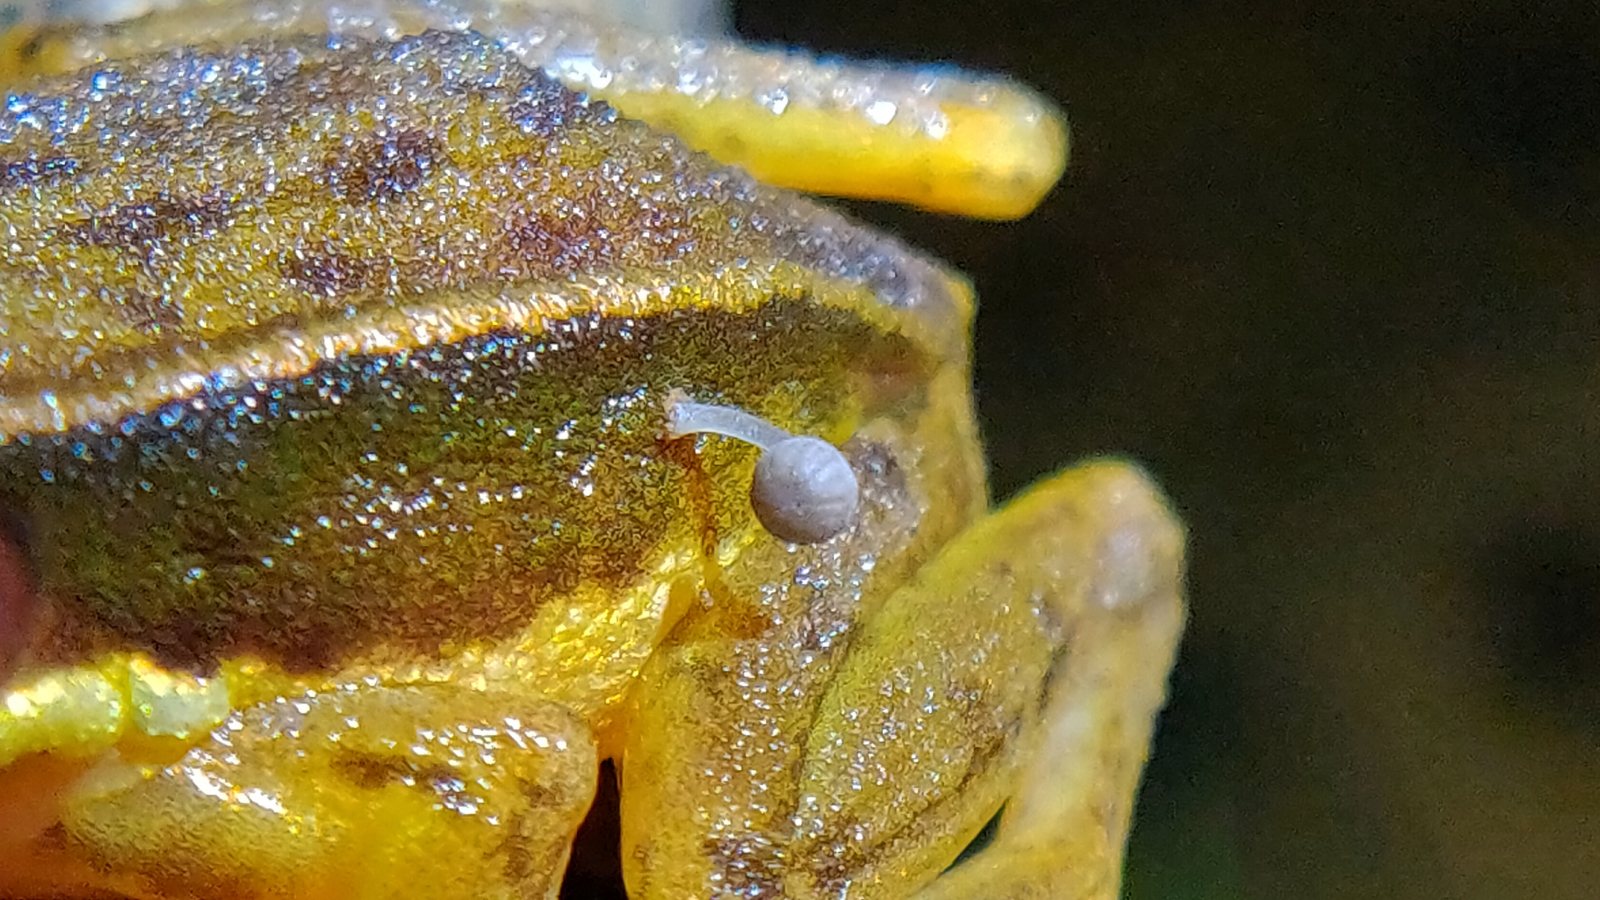 Close-up image of the mushroom coming out of the body of the yellow frog.